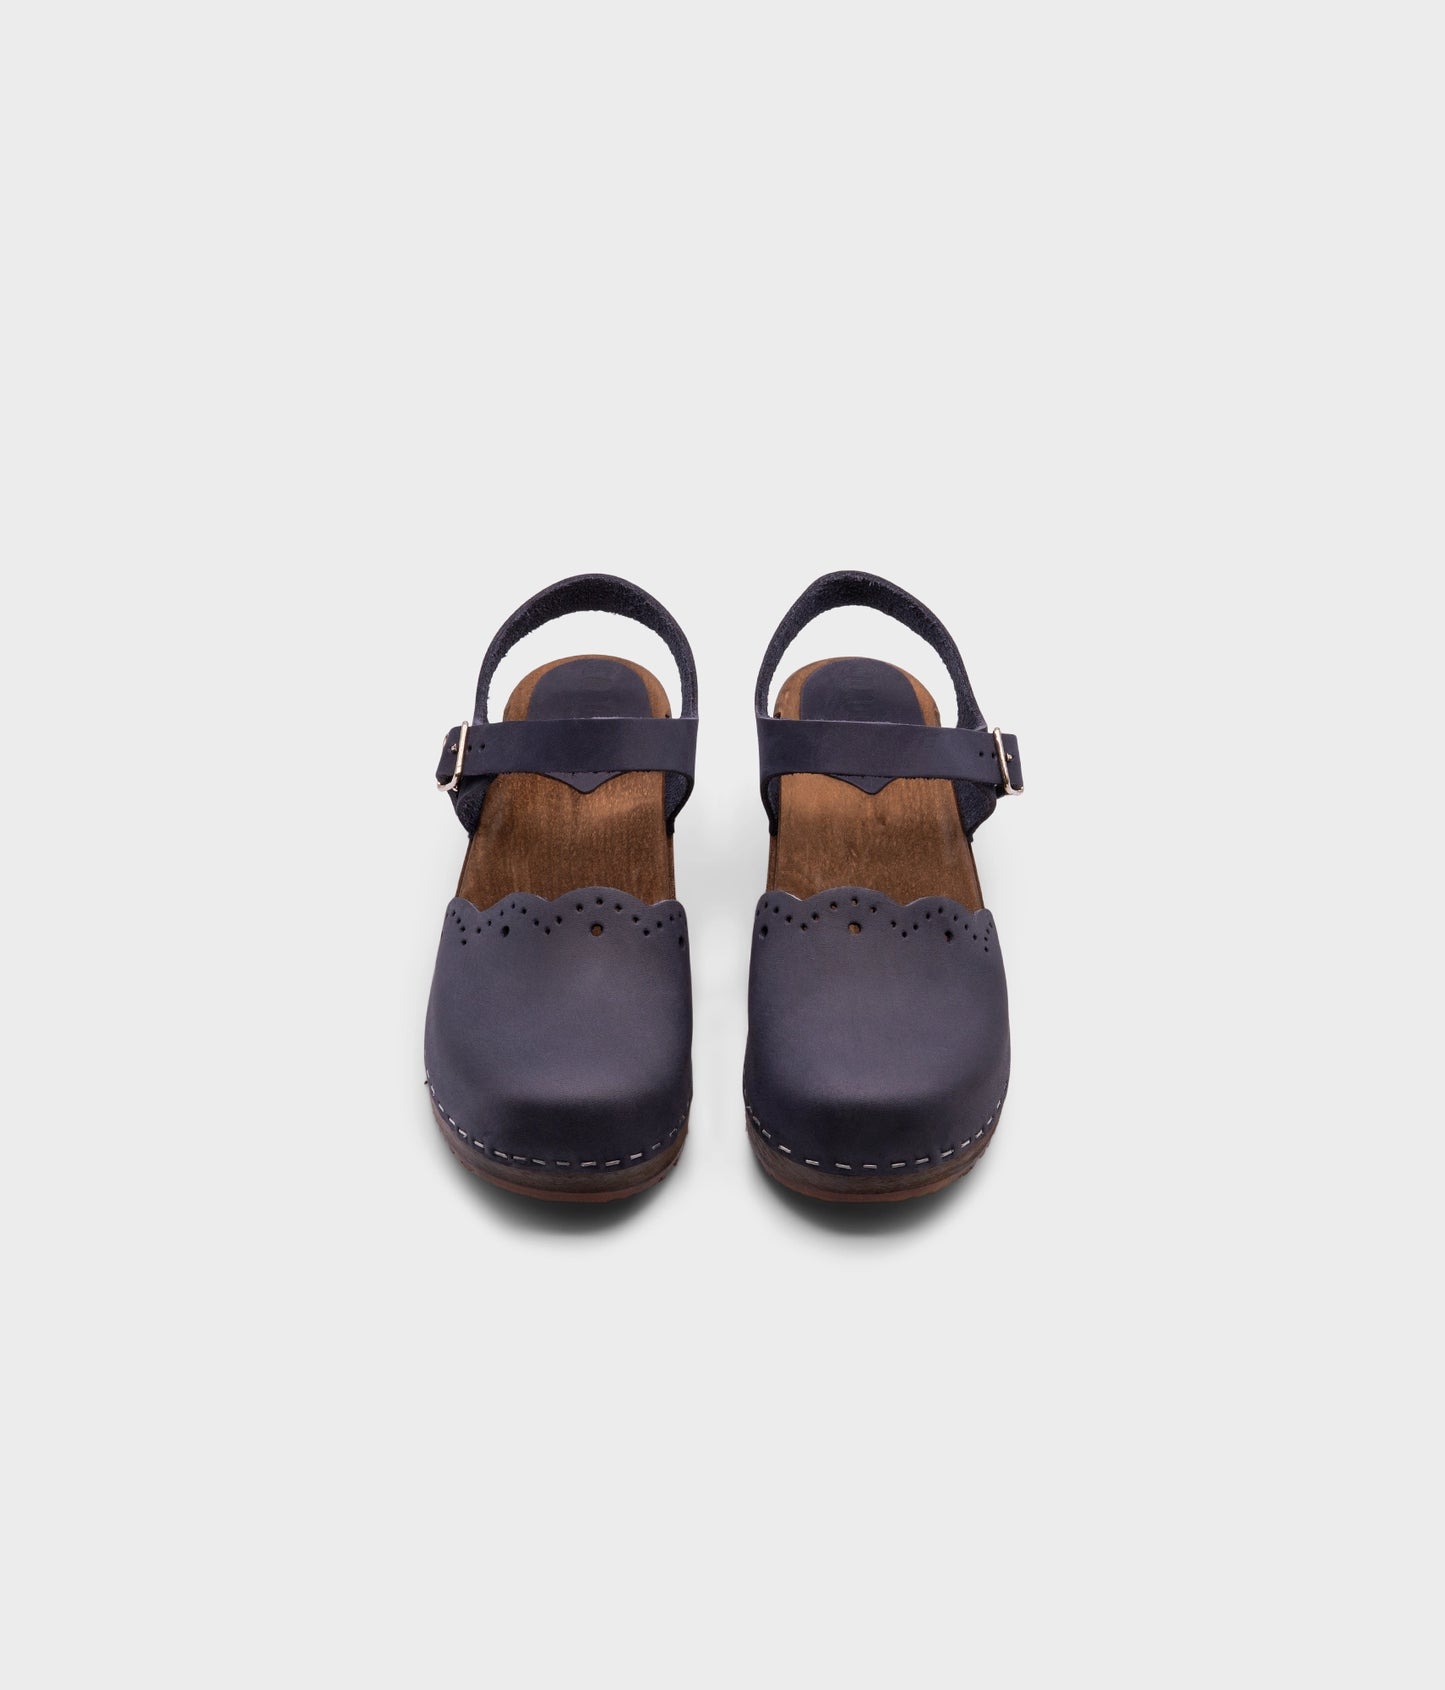 low heeled closed-toe clog sandals in navy blue nubuck leather with a wavy leather cutout stapled on a dark wooden base